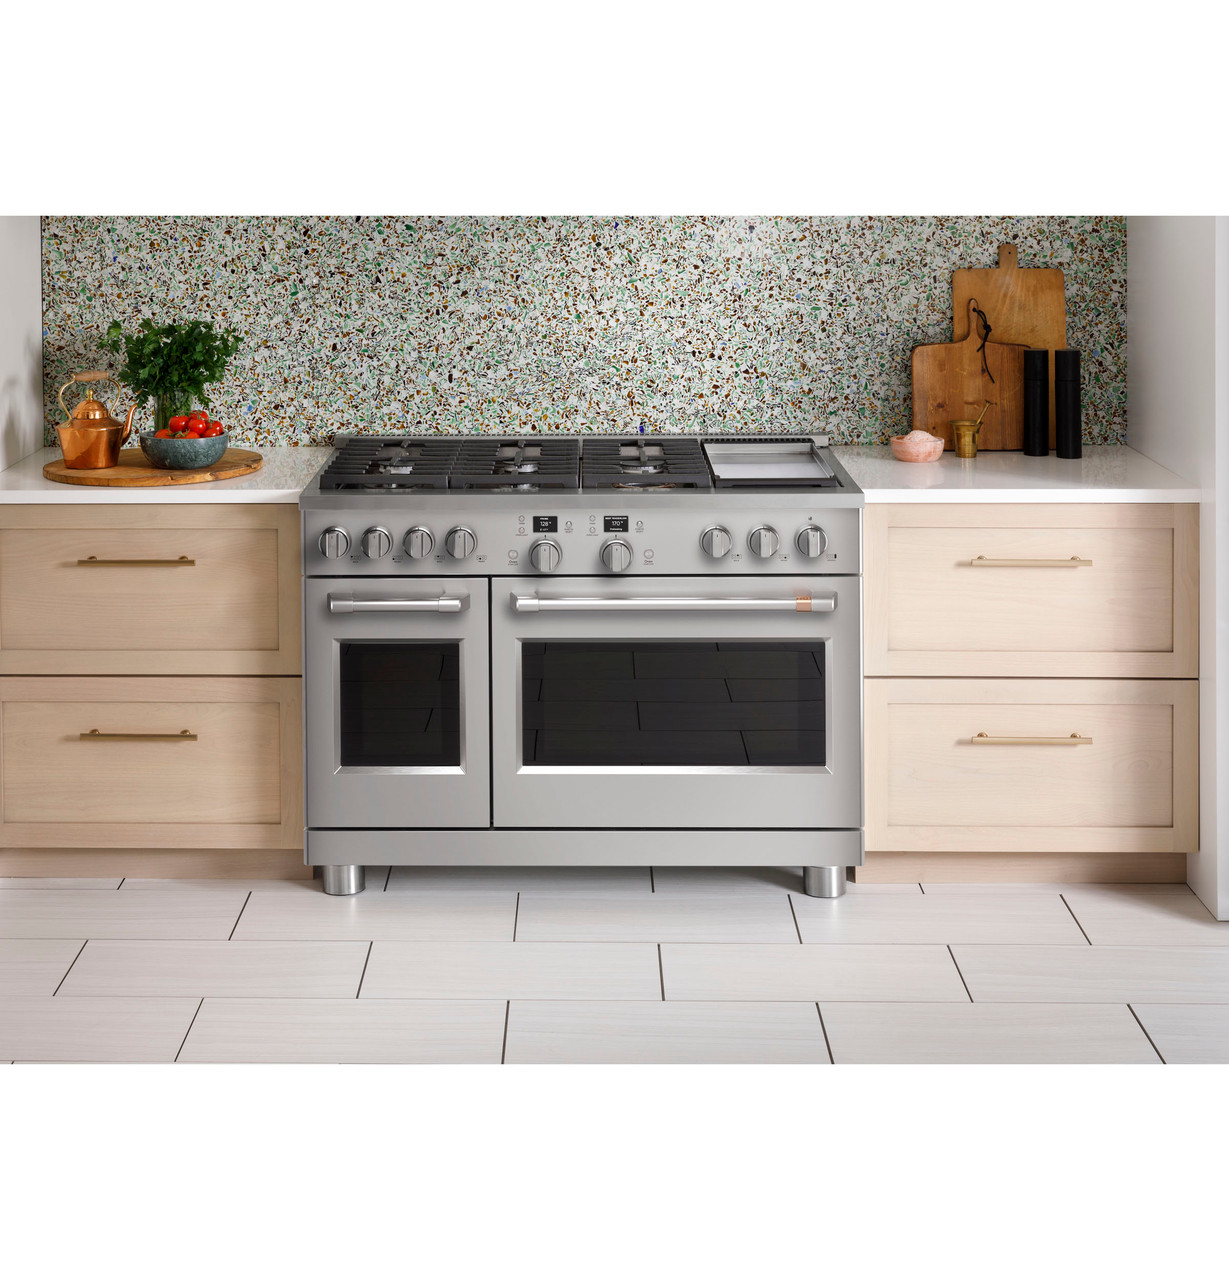 Cafe - CGU486P2TS1 - Café™ 48 Commercial-Style Gas Rangetop with 6 Burners  and Integrated Griddle (Natural Gas)-CGU486P2TS1